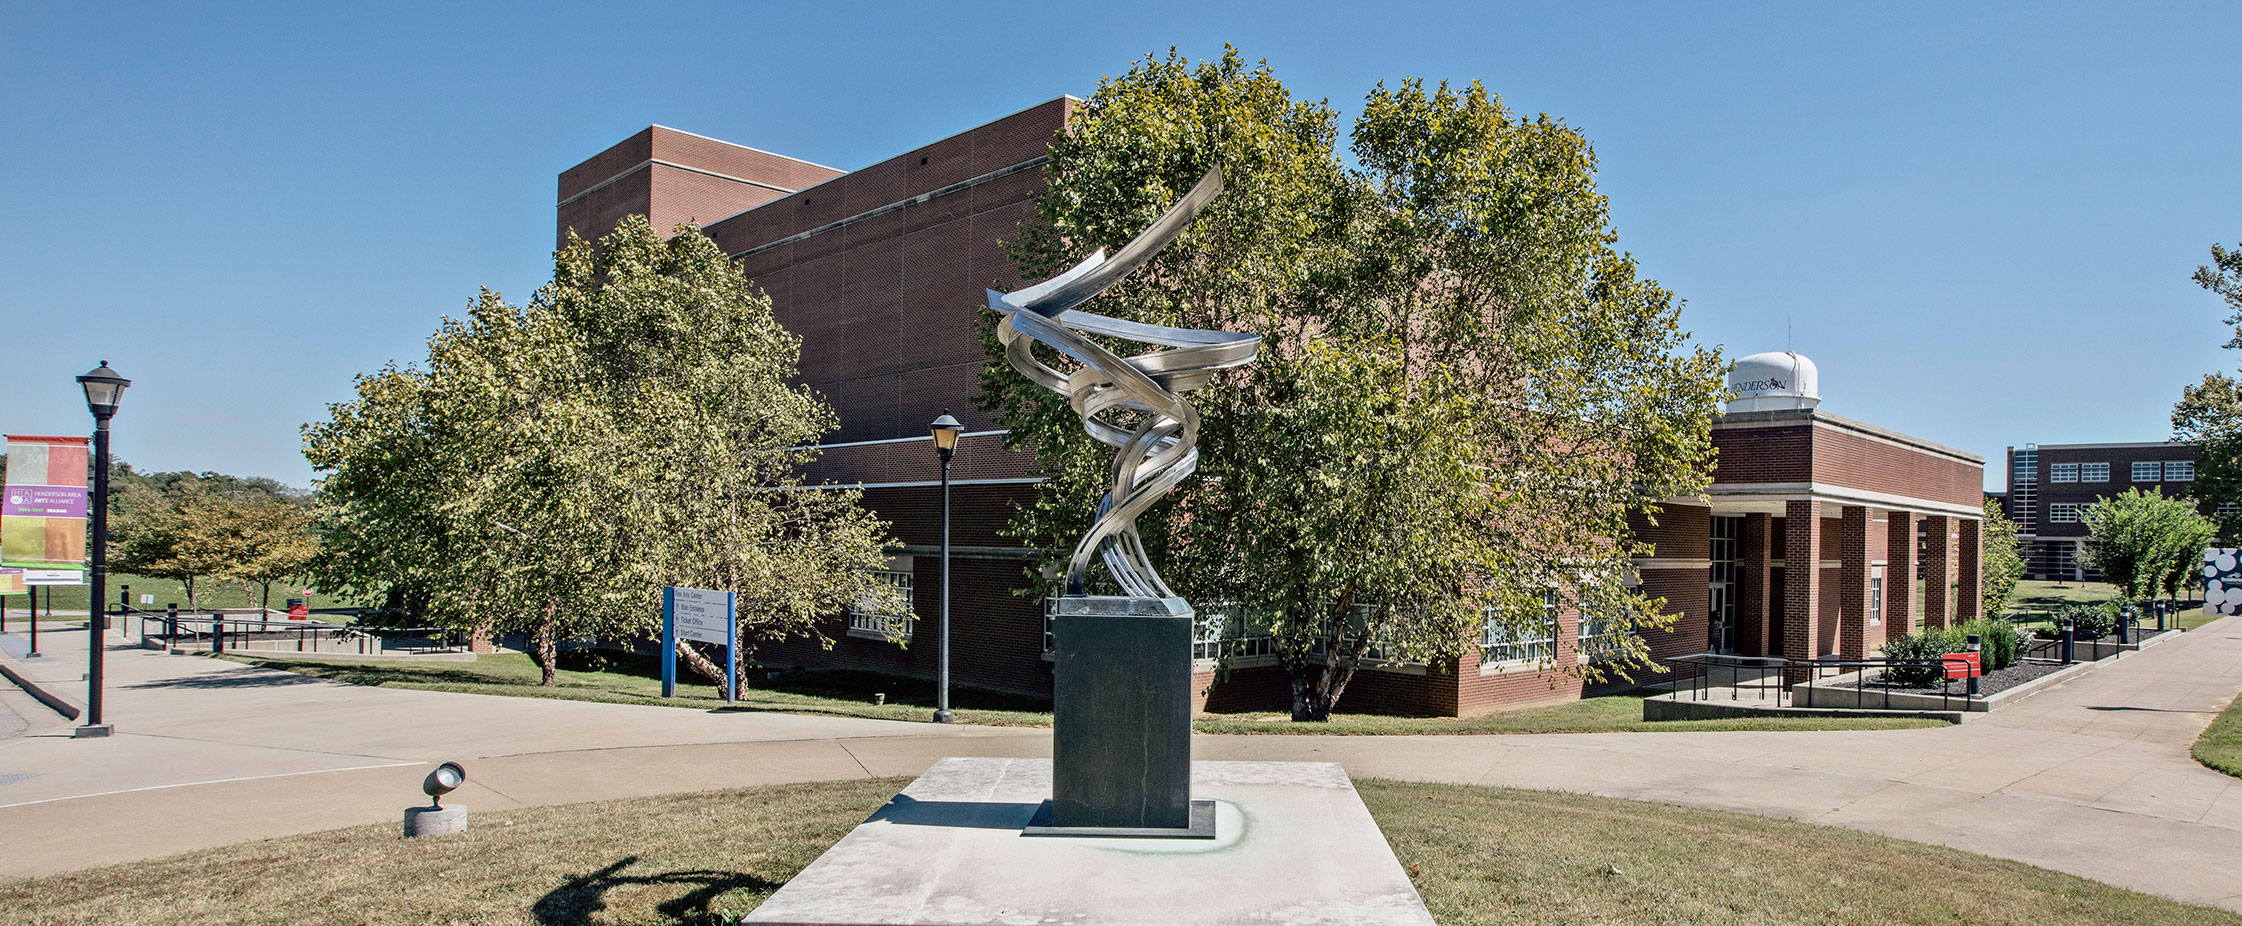 Image of the statue in front of the building